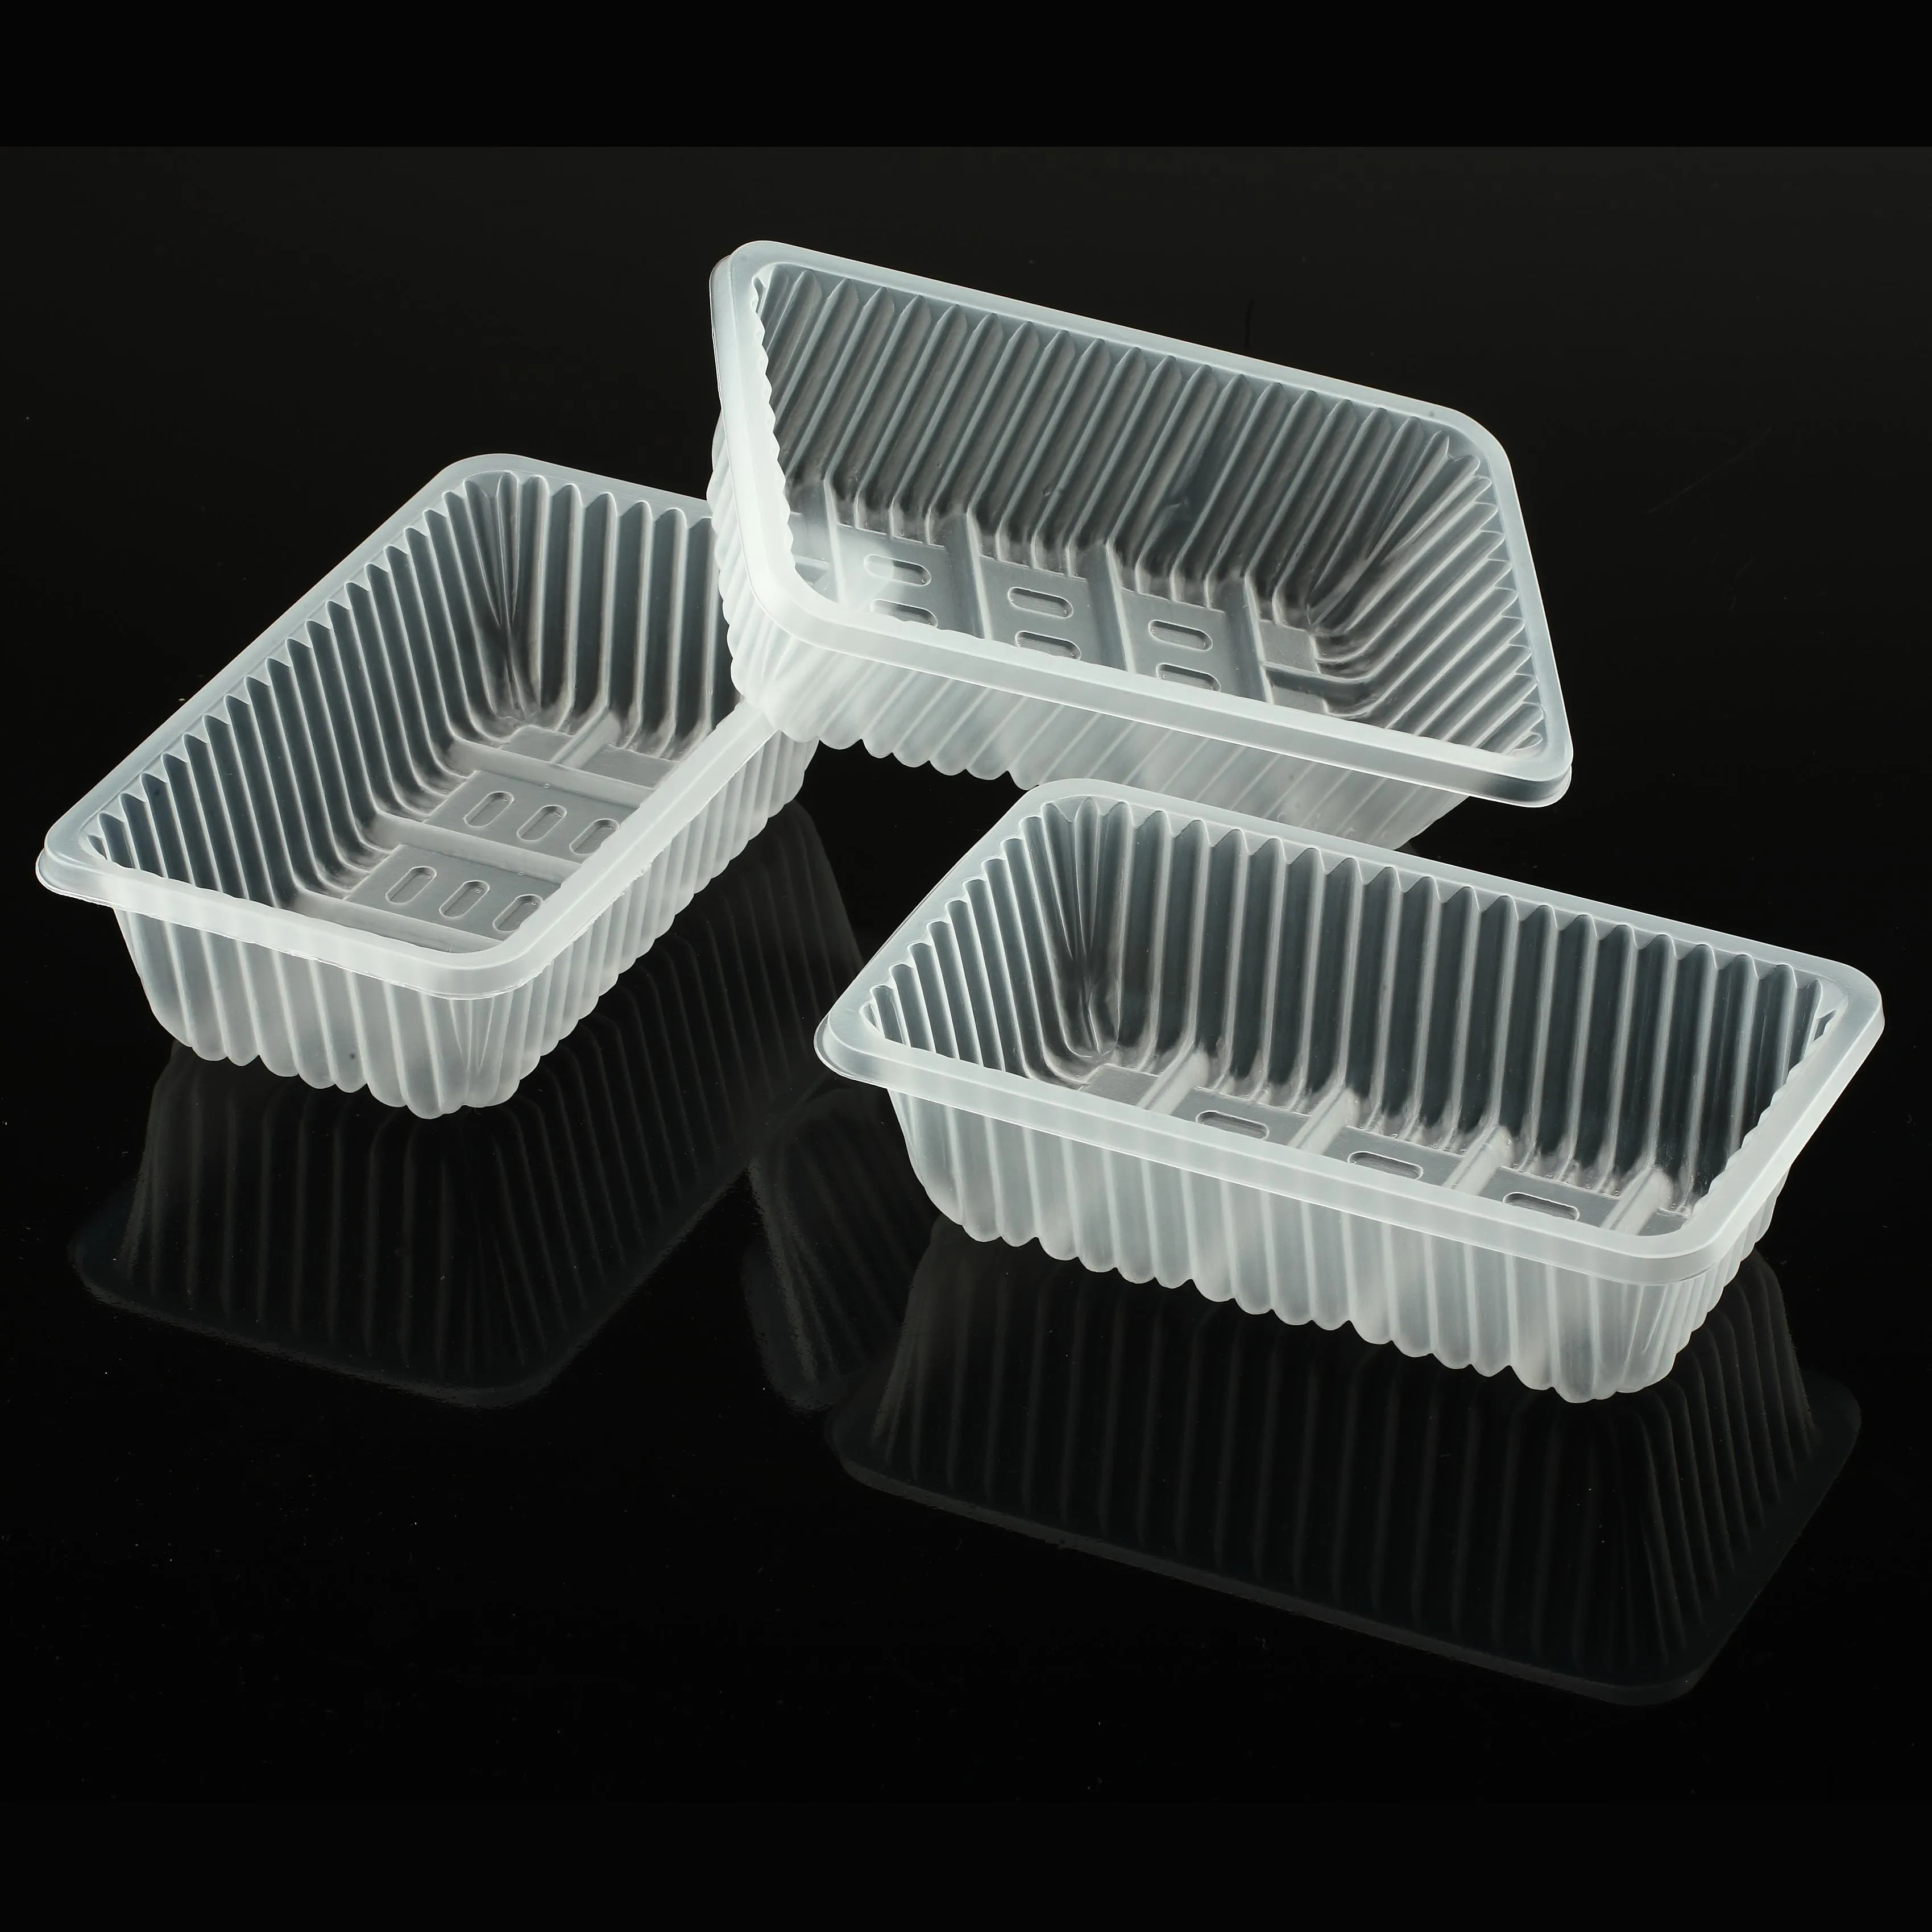 Reliable food PP disposable plastic storage container box set